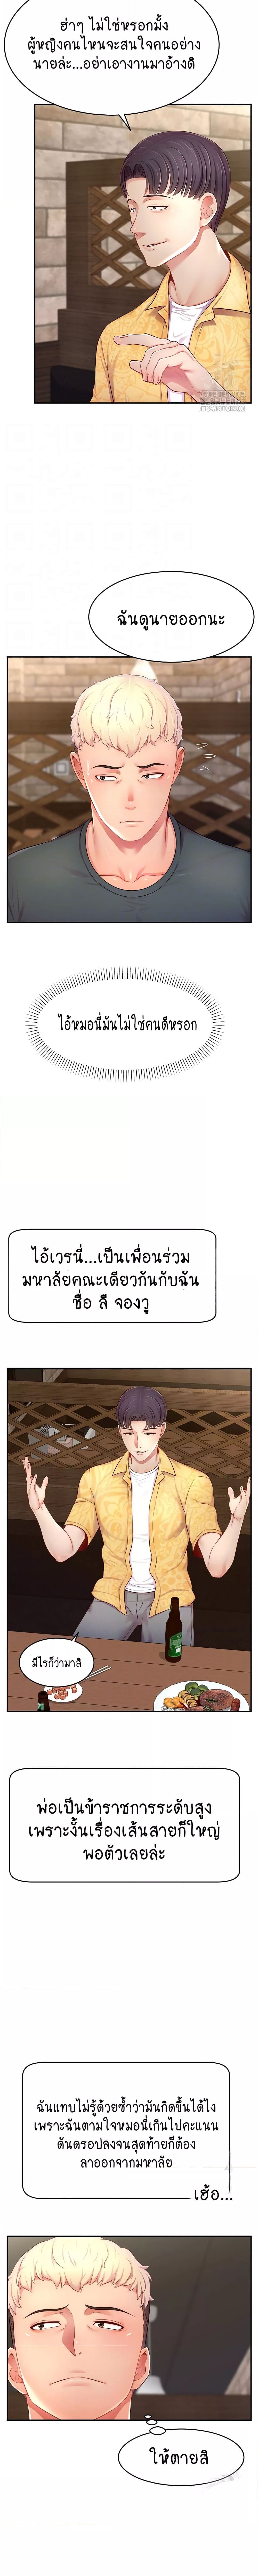 Making Friends With Streamers by Hacking! ตอนที่ 10 ภาพ 2